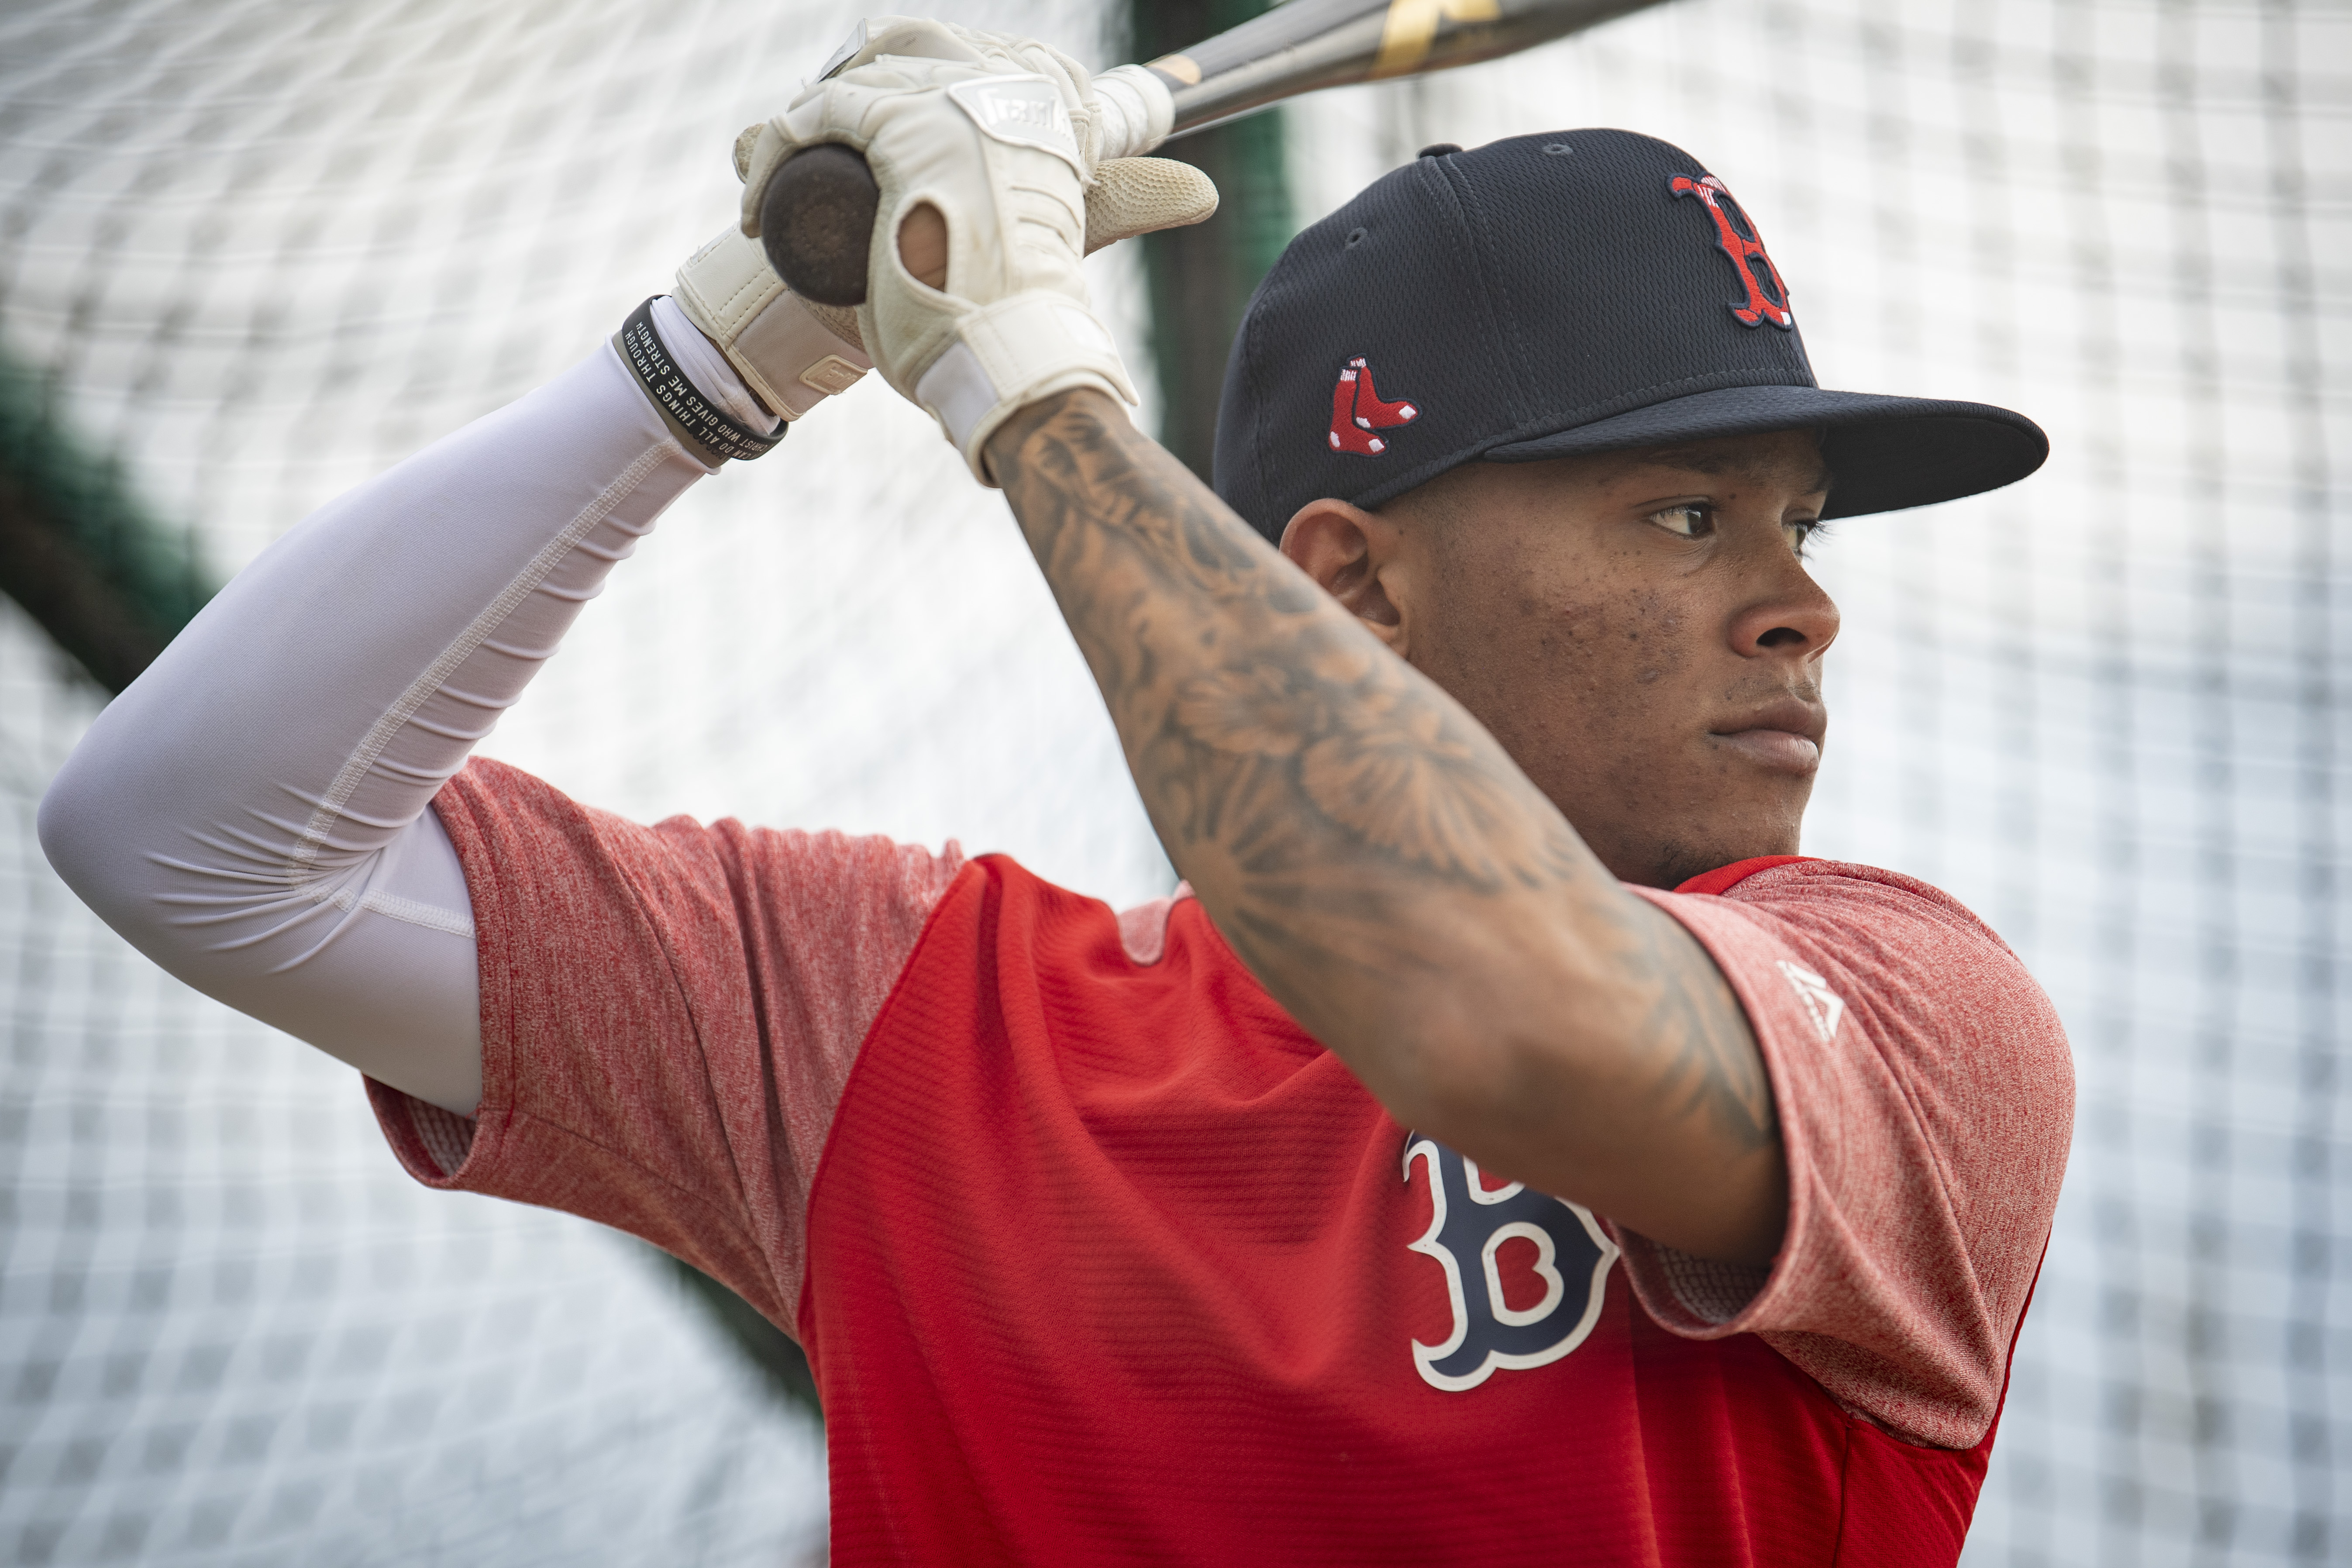 Take batting practice like your favorite Salem Red Sox players